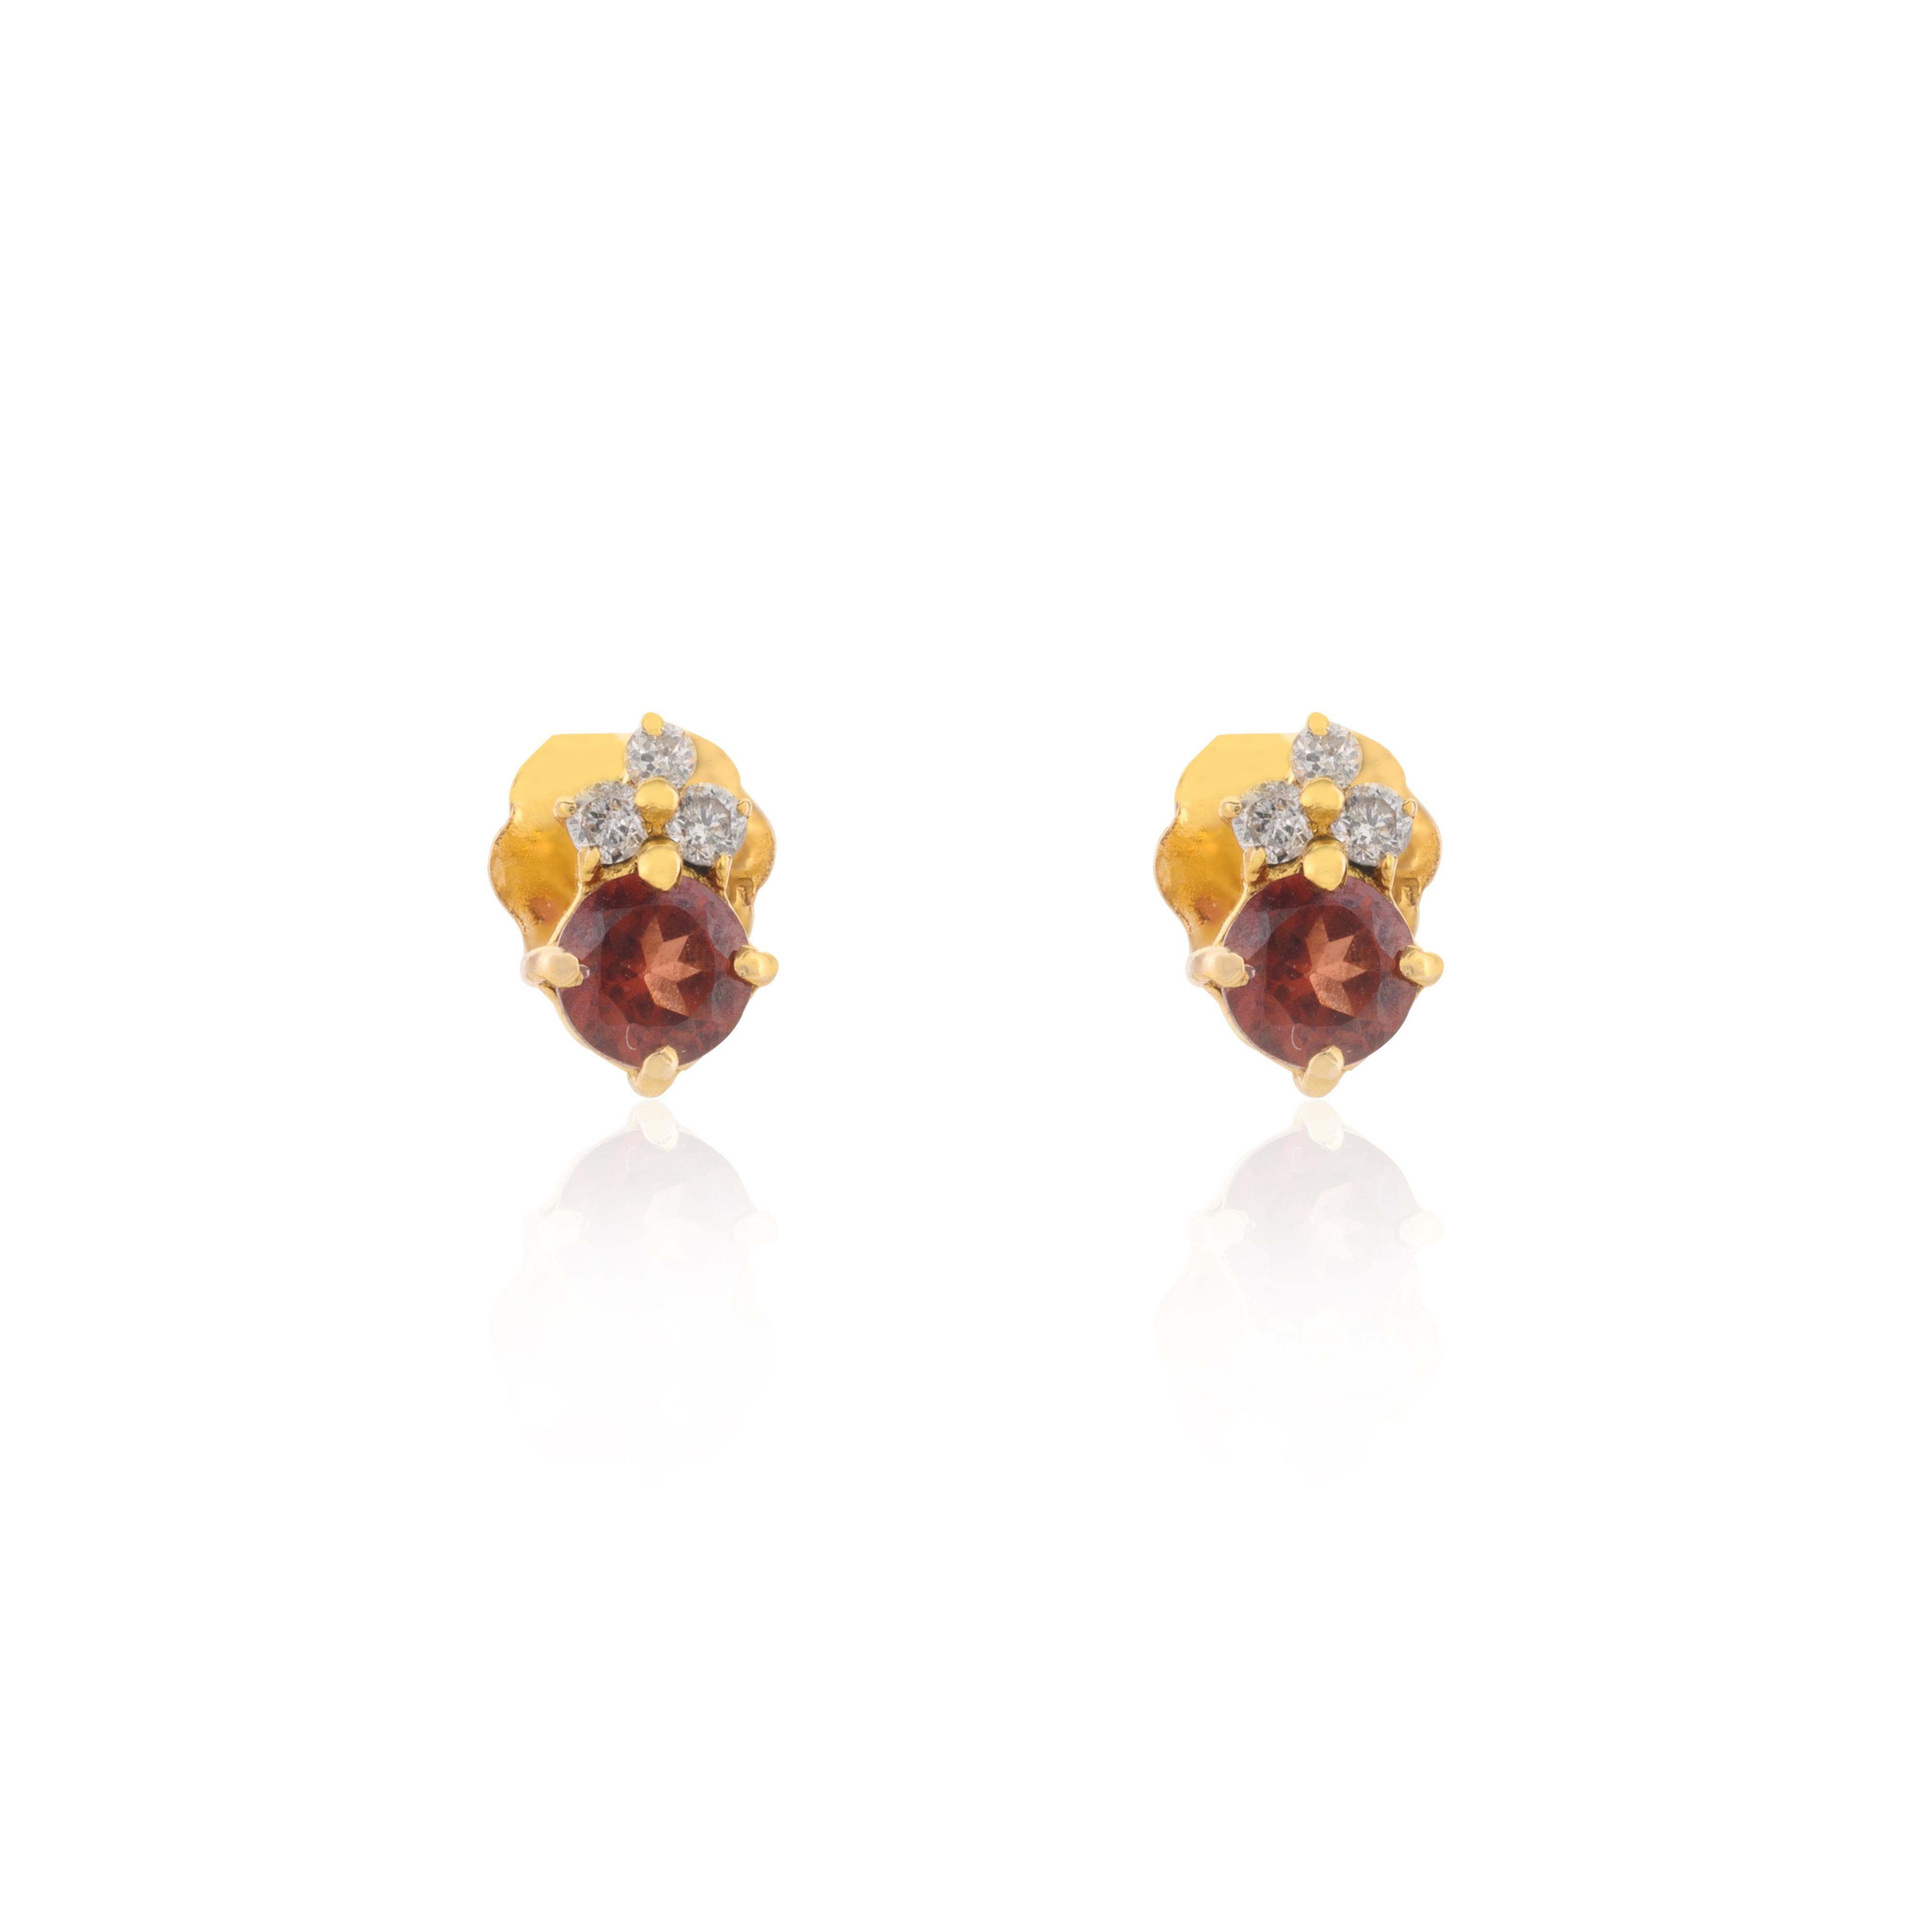 Art Deco Dainty Garnet and Diamond Pushback Stud Earrings 14k Solid Yellow Gold for Her